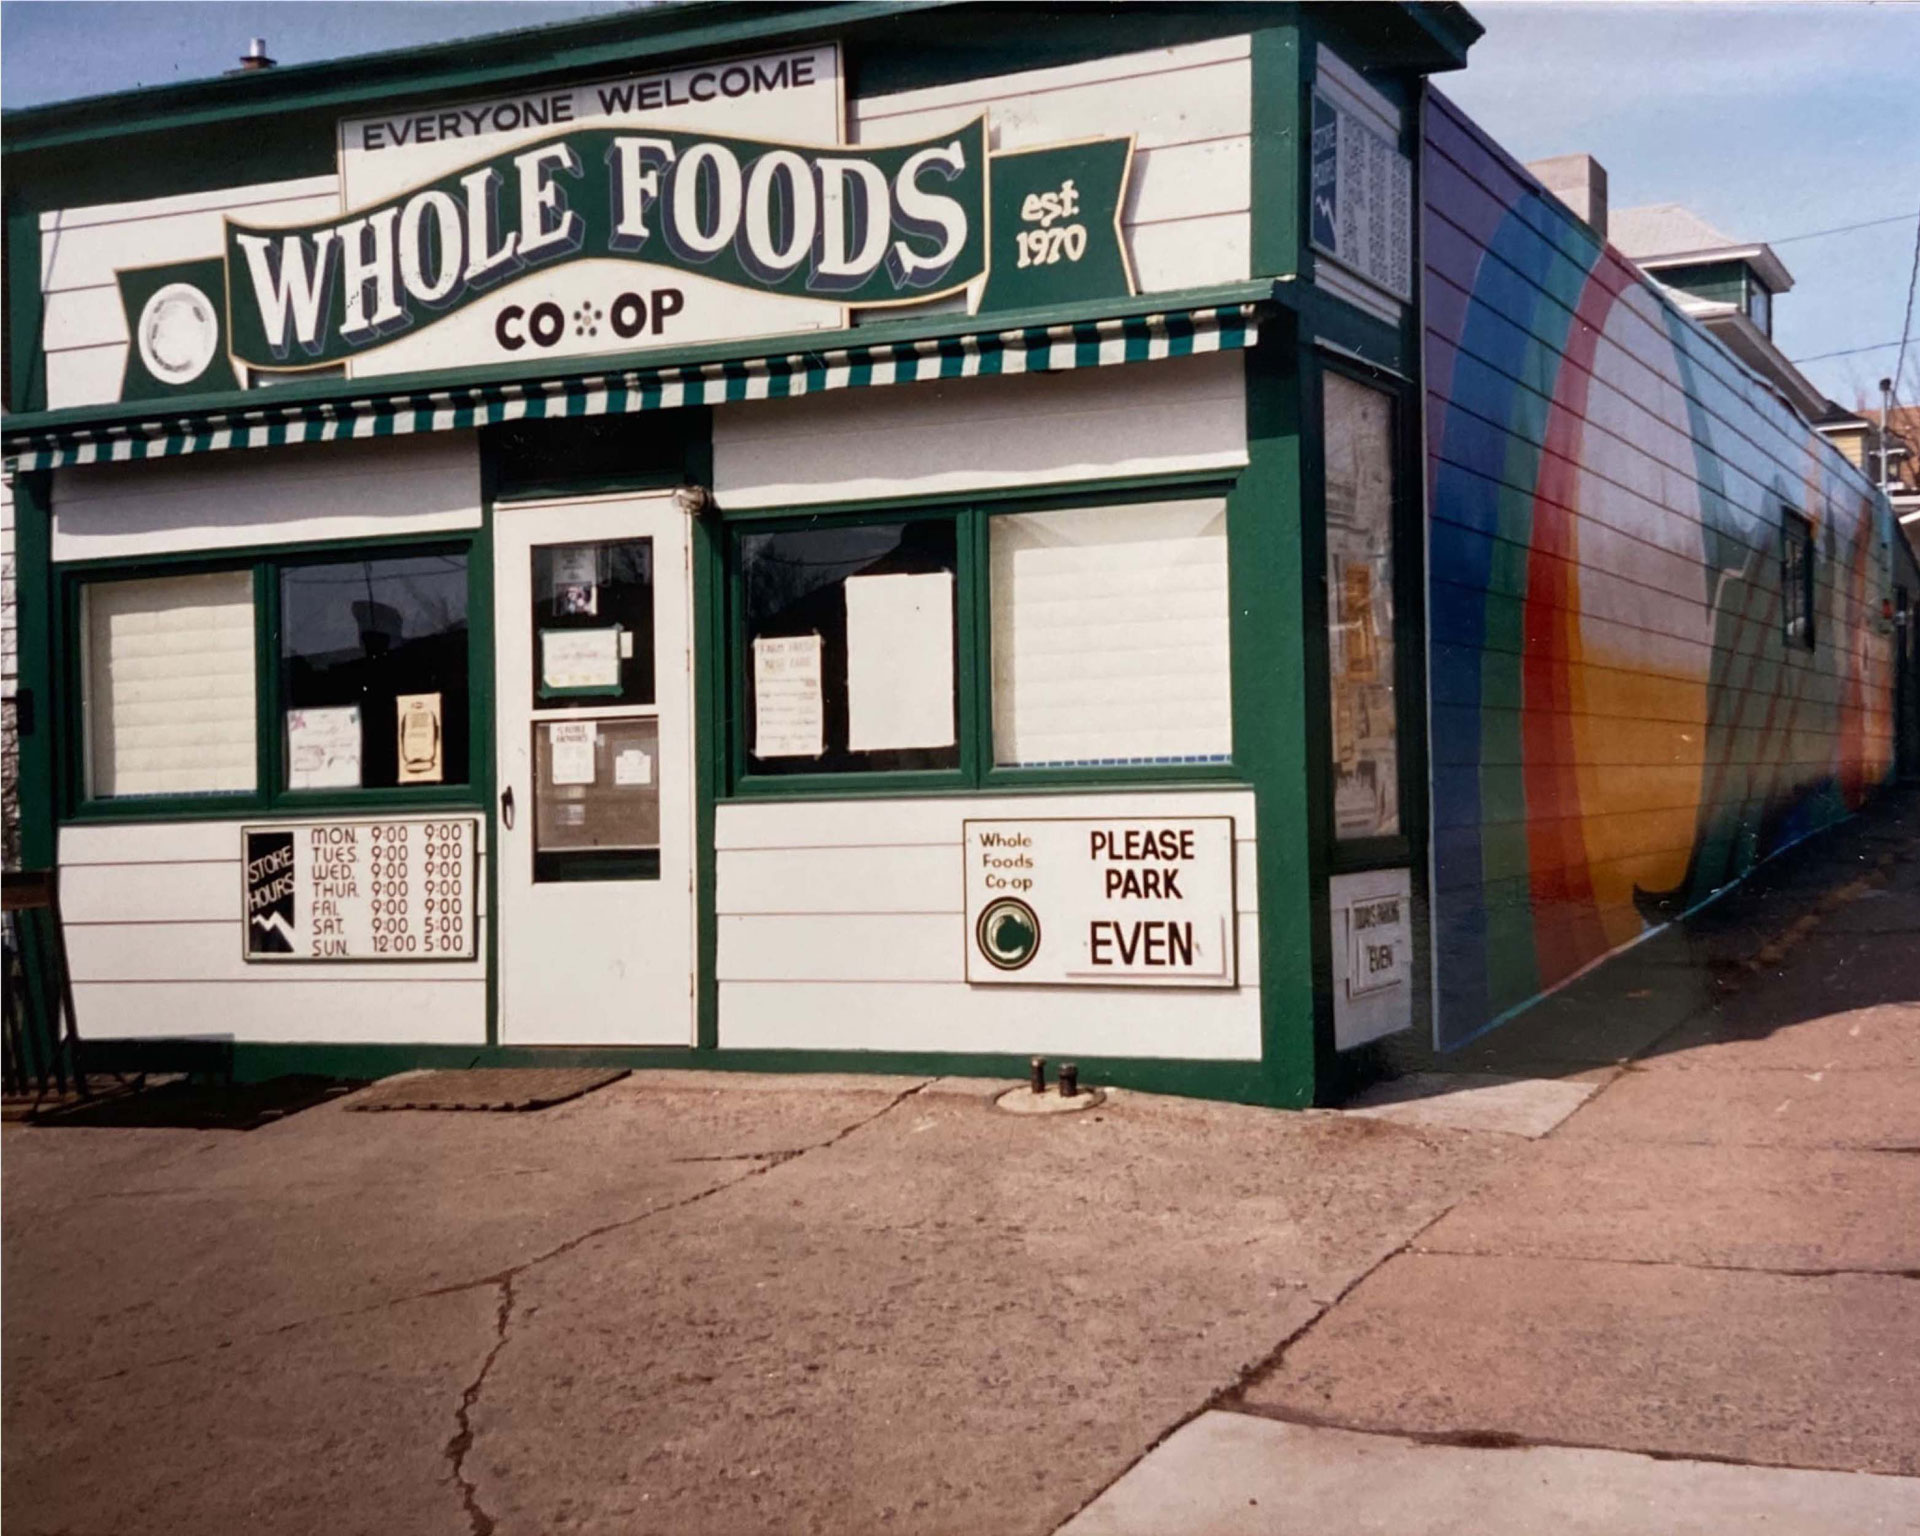 This image shows the exterior of a small grocery store called 